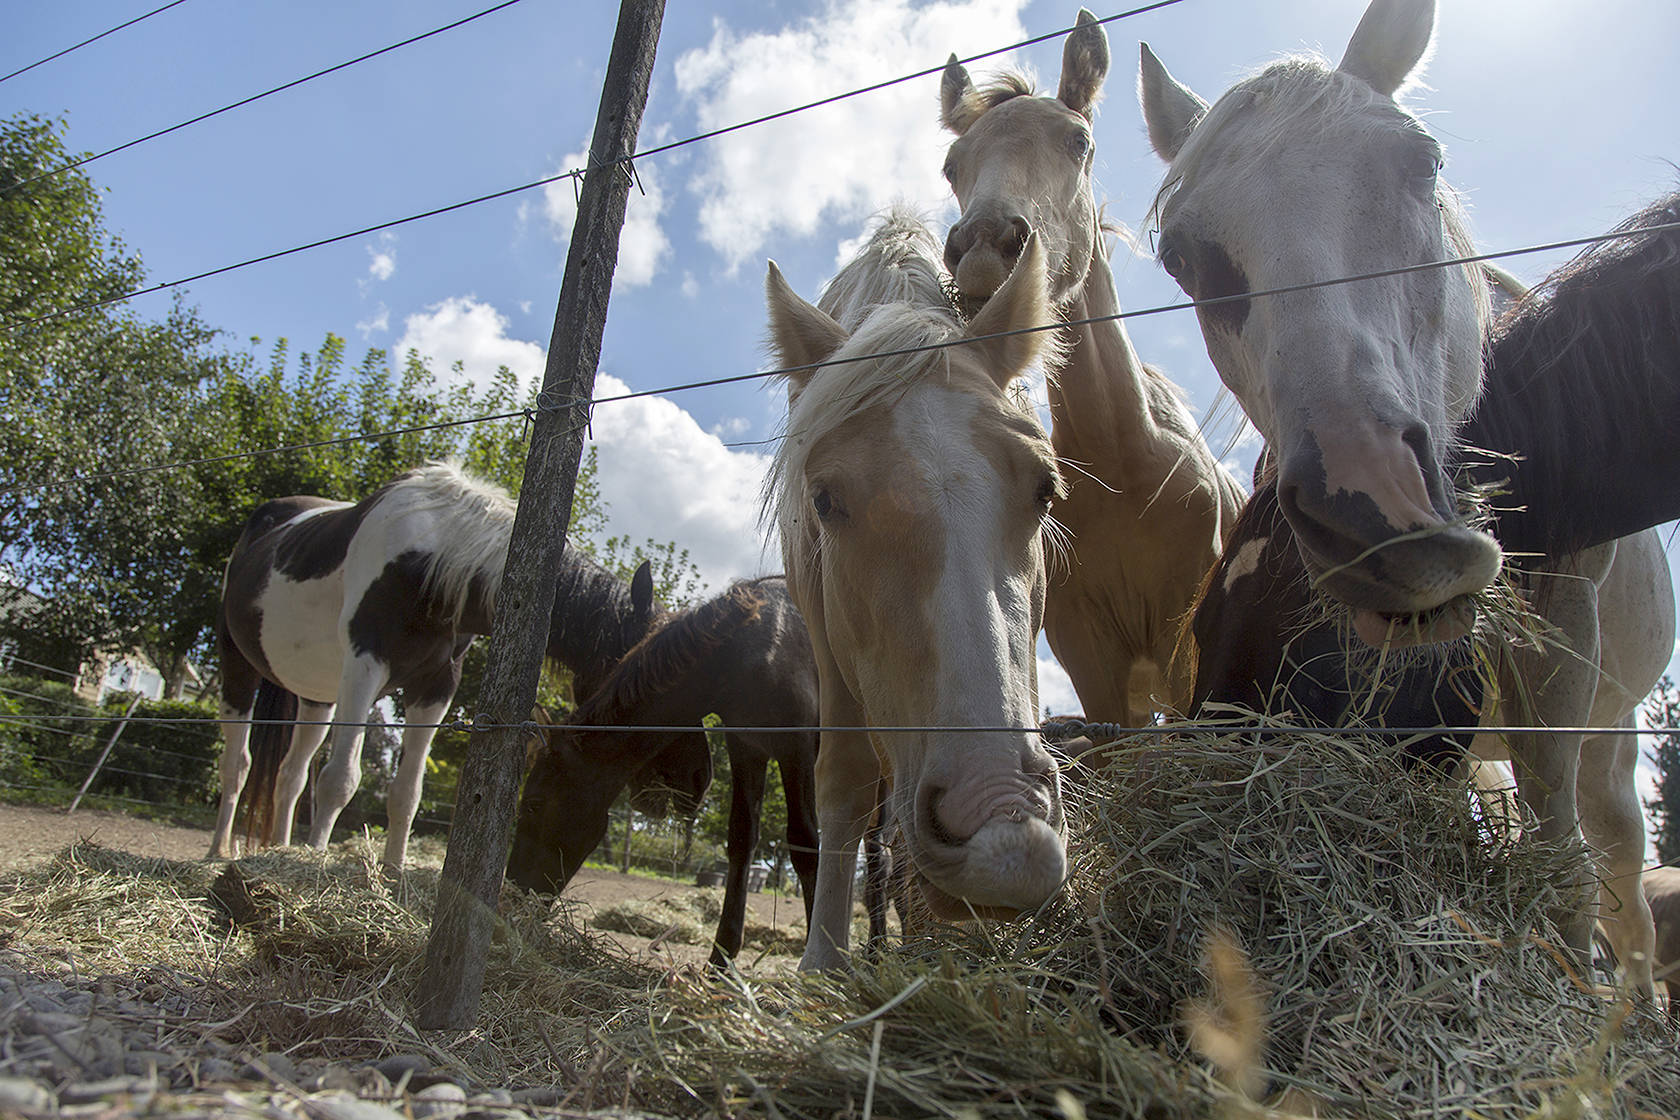 More than 100 horses are being hoarded by a nonprofit in Puget Sound ...